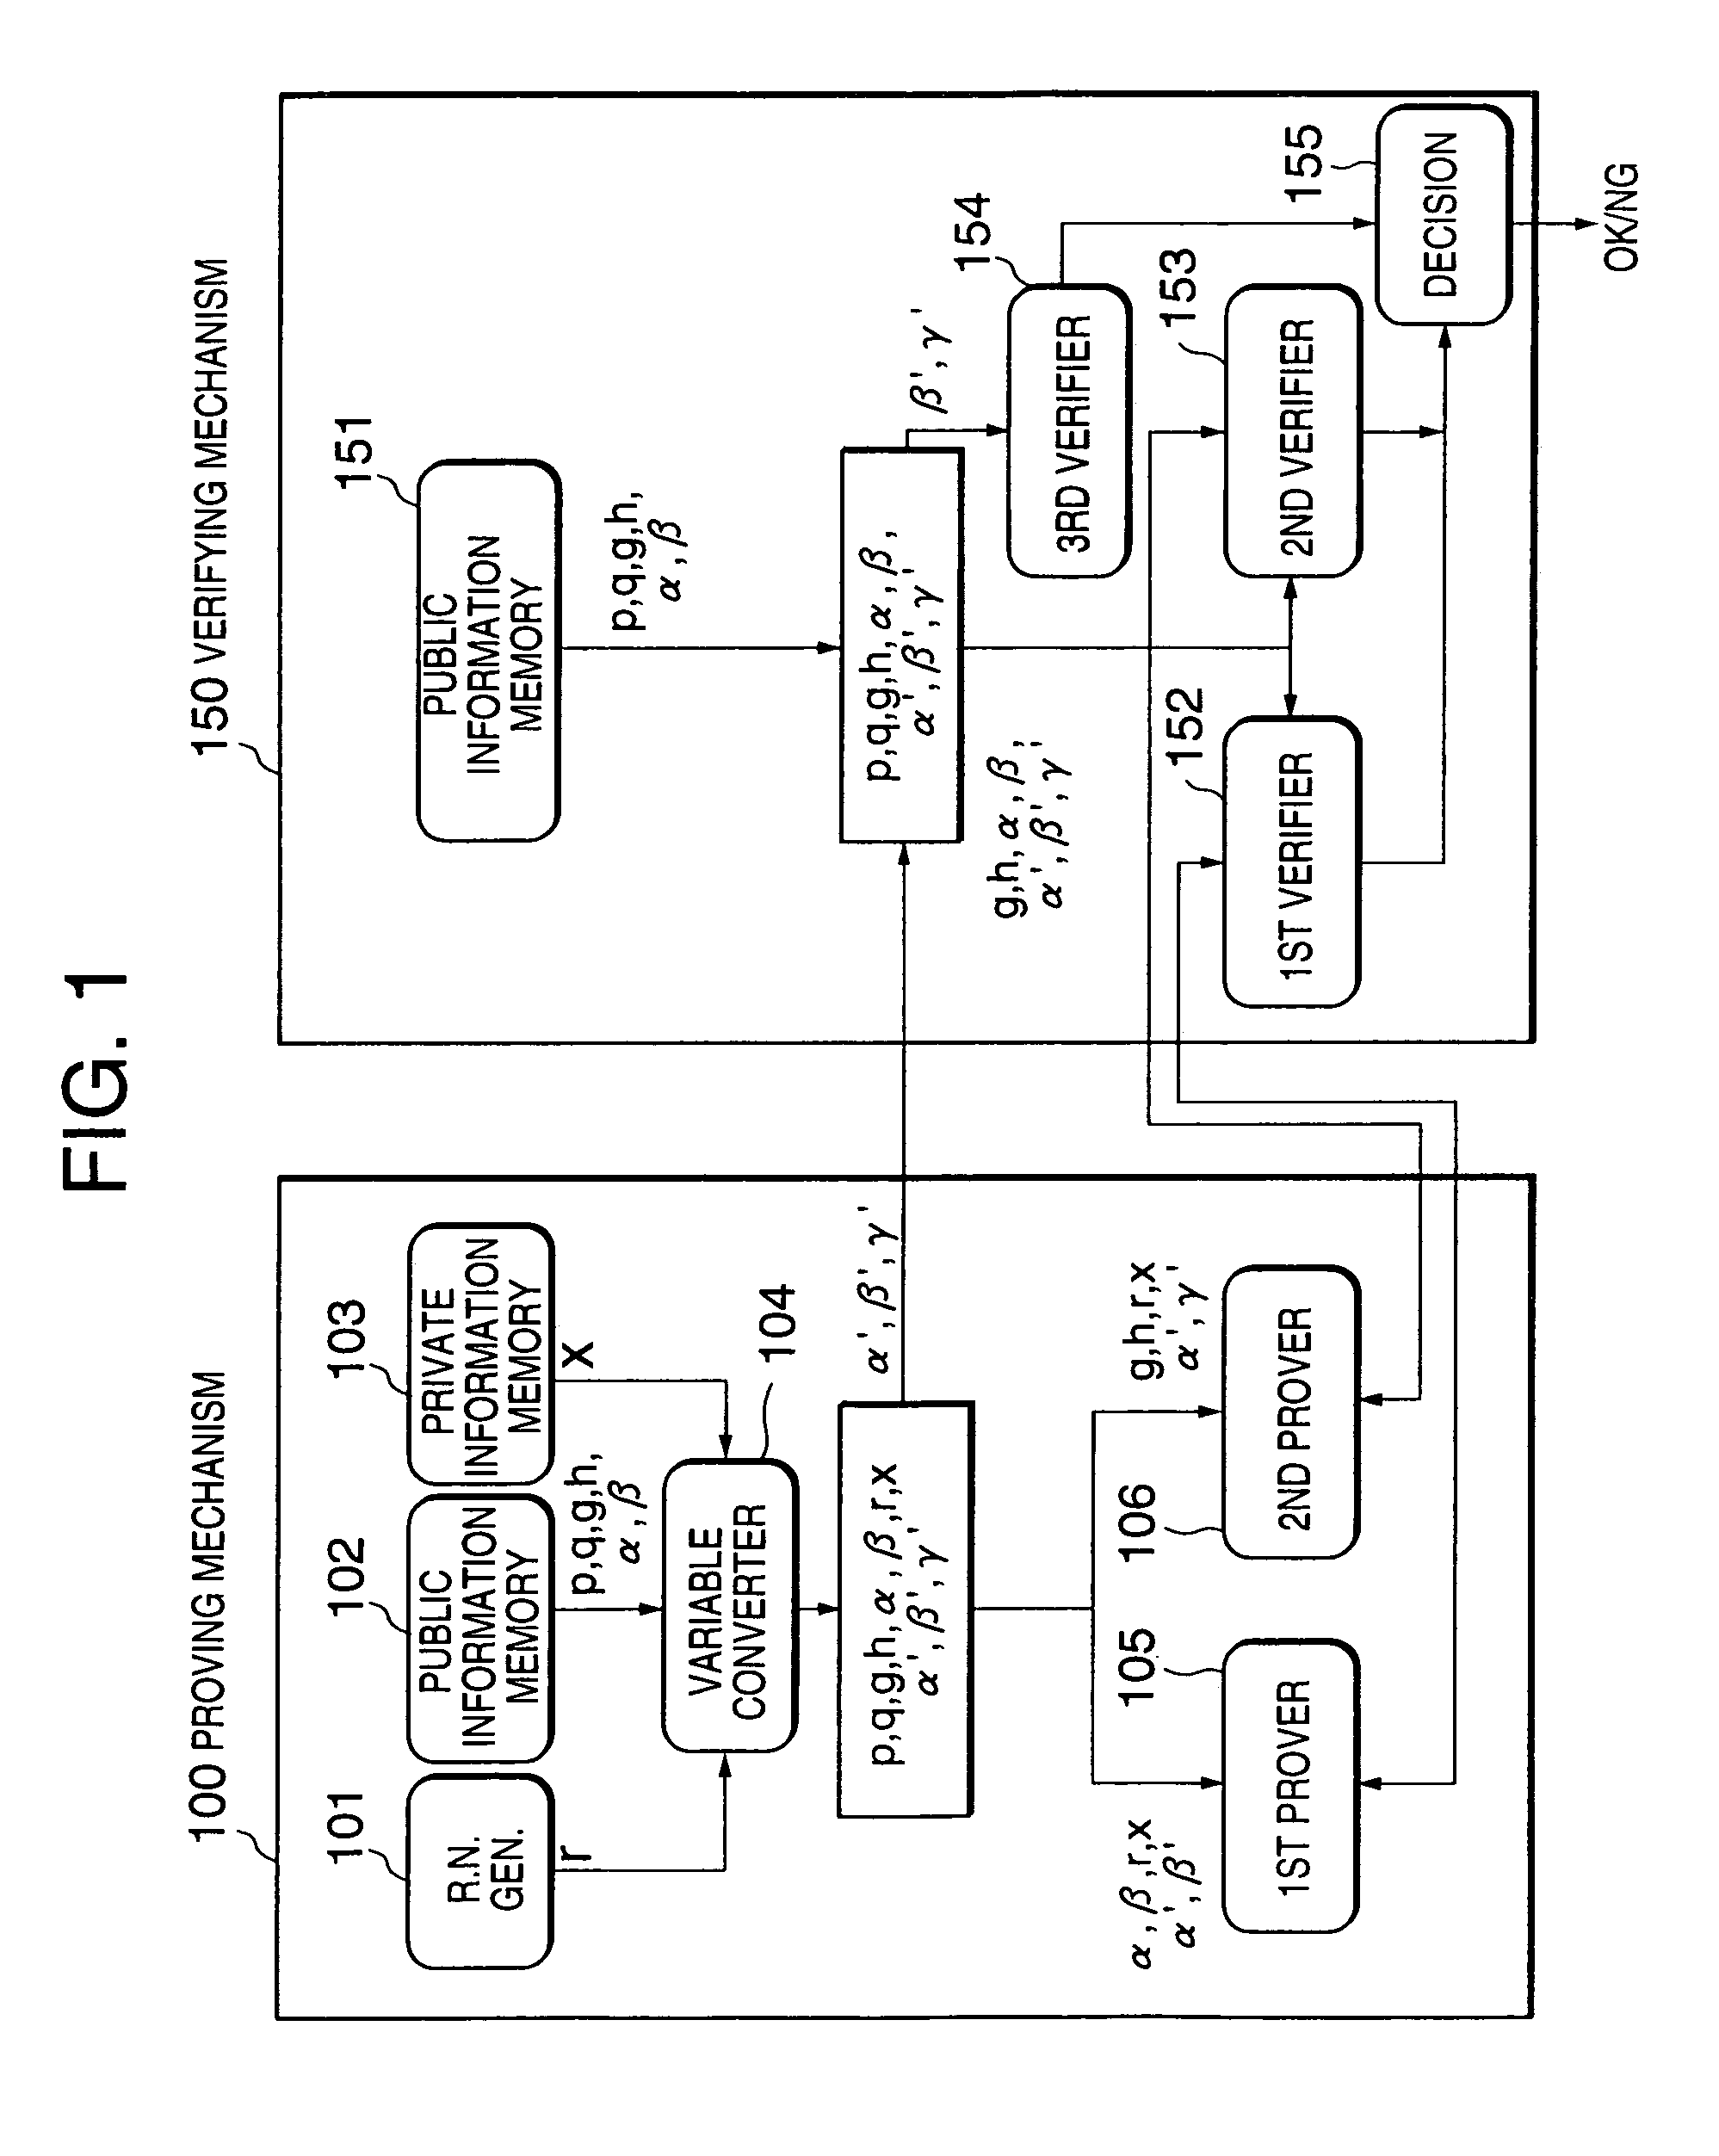 Zero-knowledge proving system and method